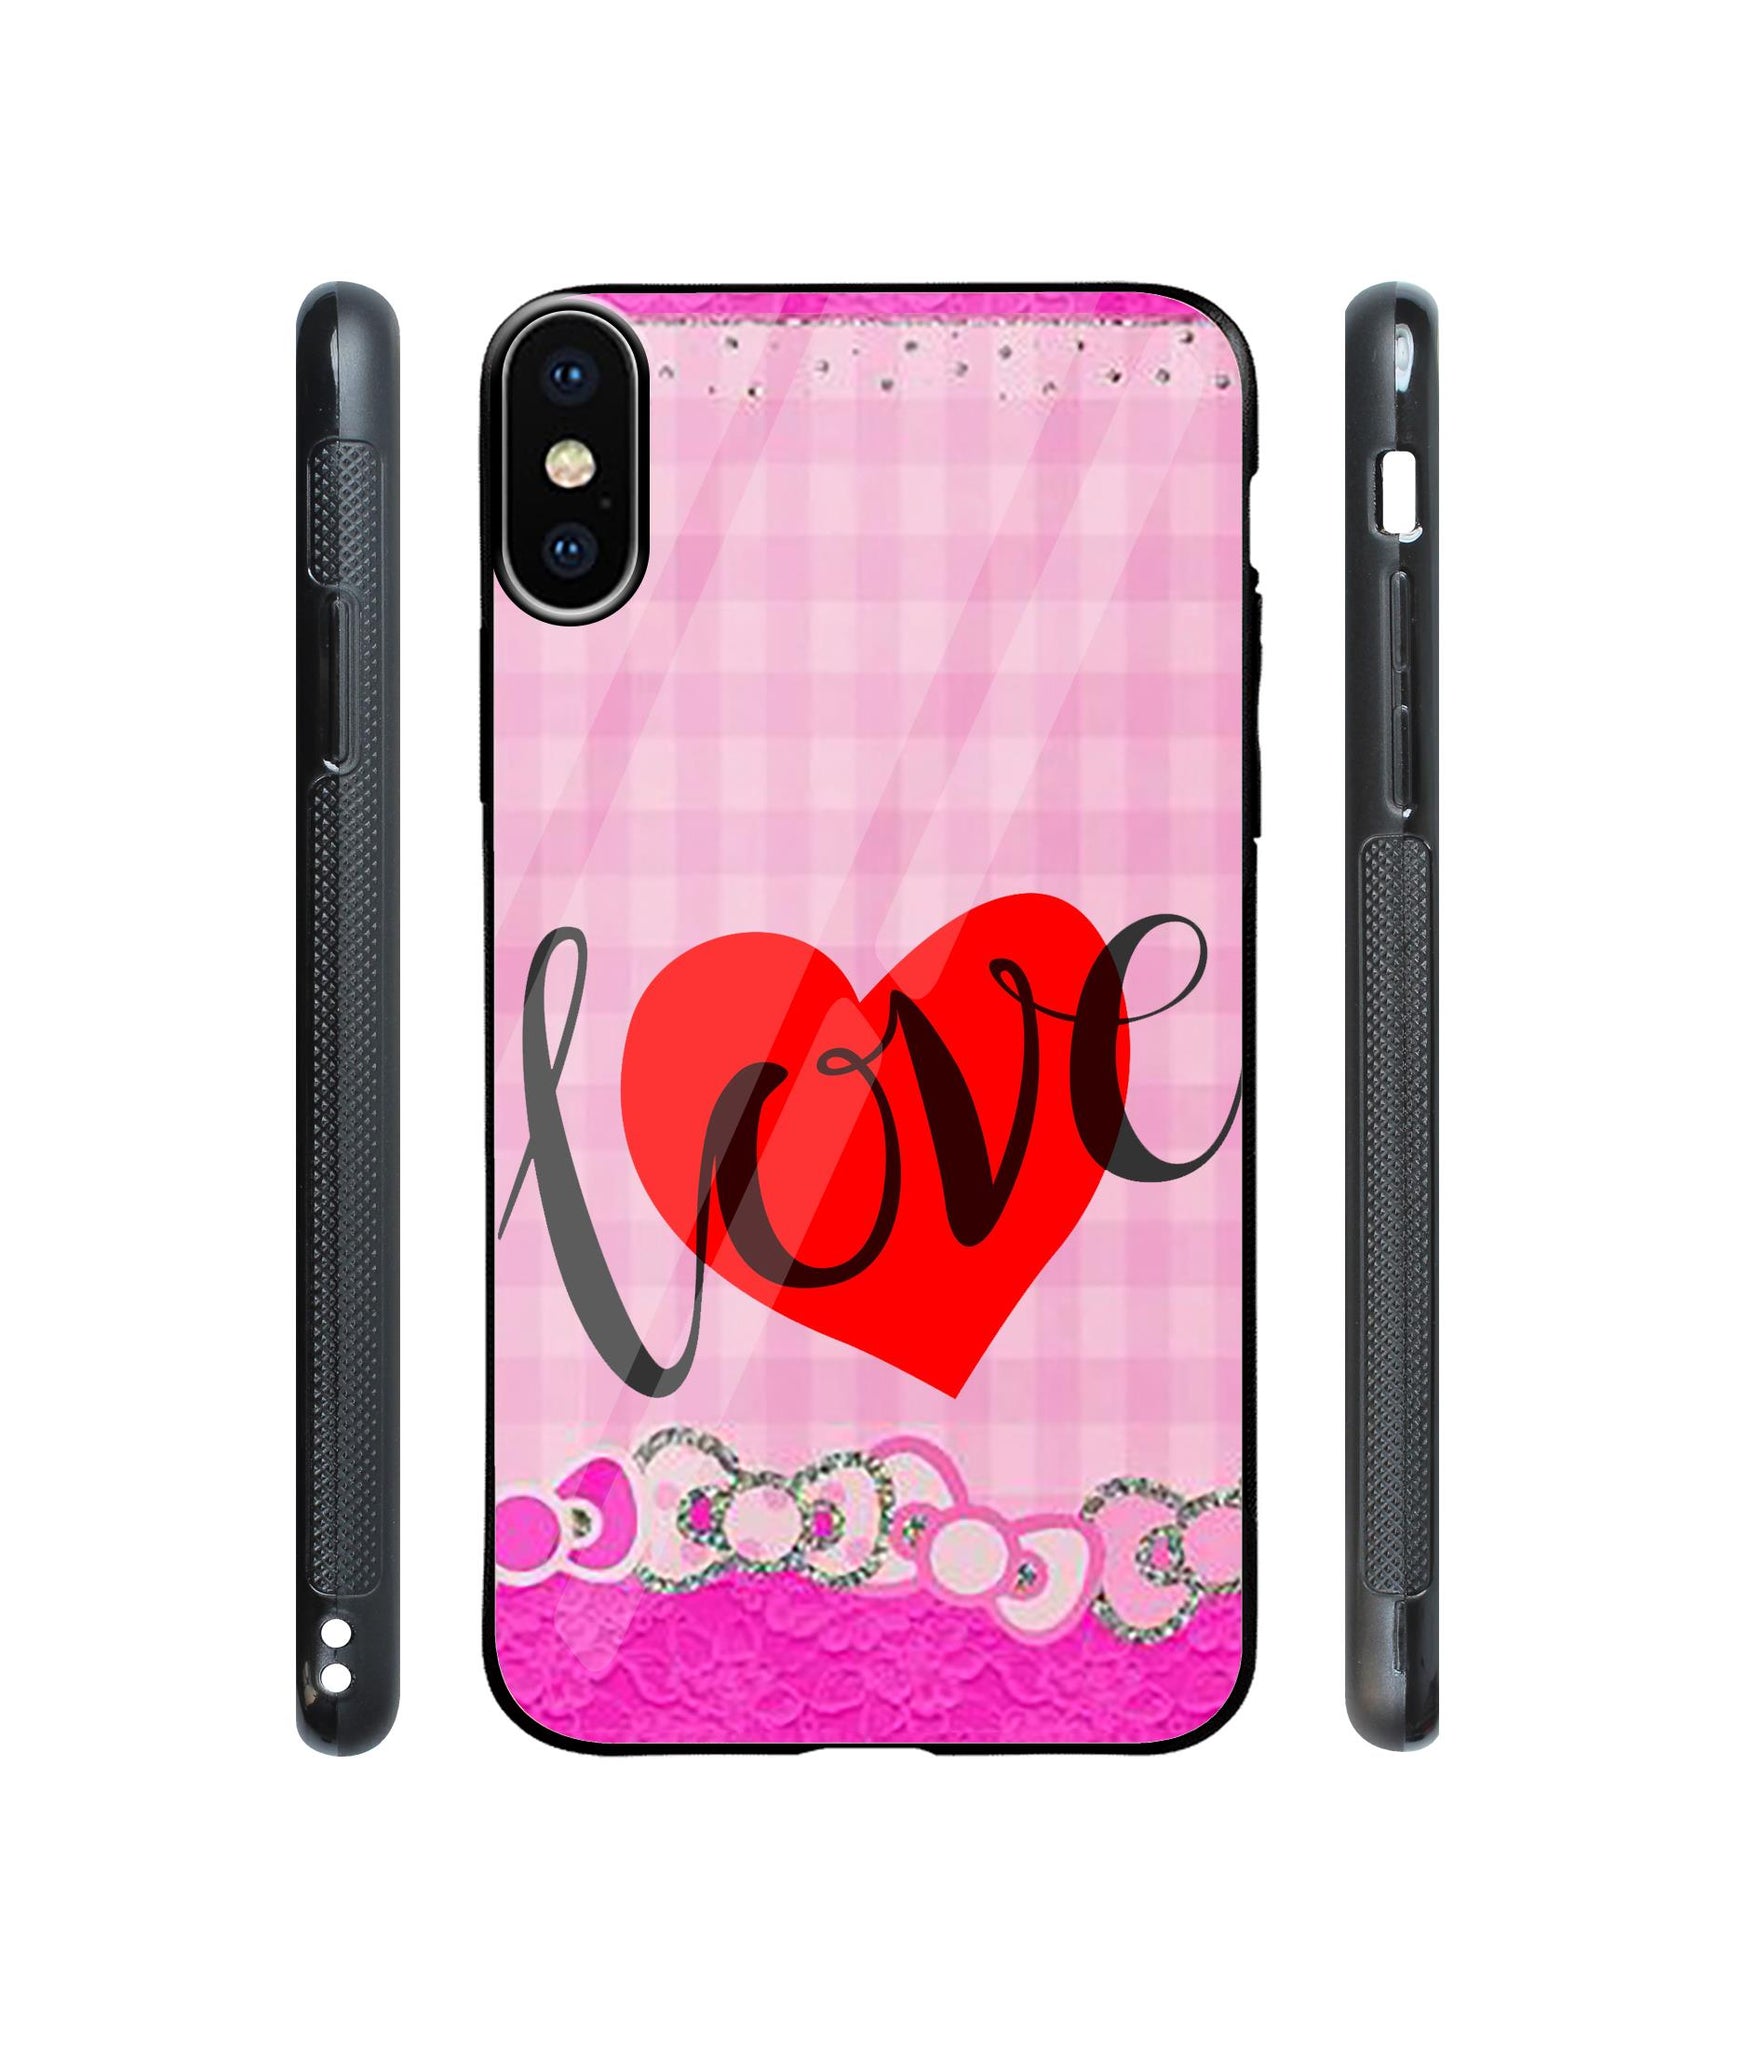 Love Print On Cloth Designer Printed Glass Cover for Apple iPhone XS Max